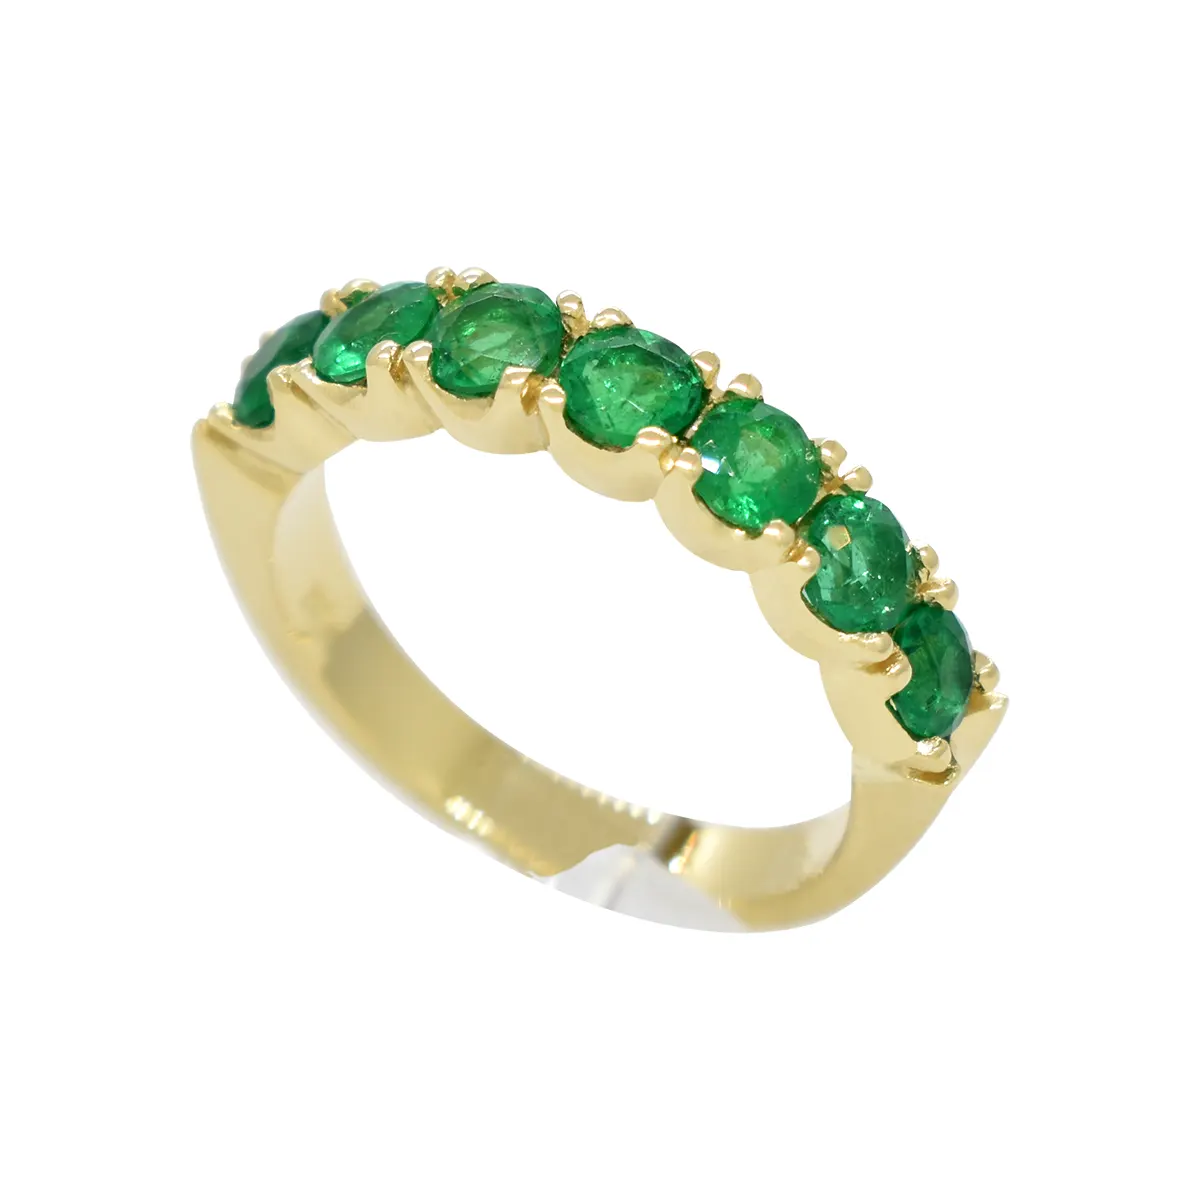 18K yellow gold emerald wedding band ring with 7 round cut natural Colombian emeralds in 0.96 Ct. t.w. classic prong setting